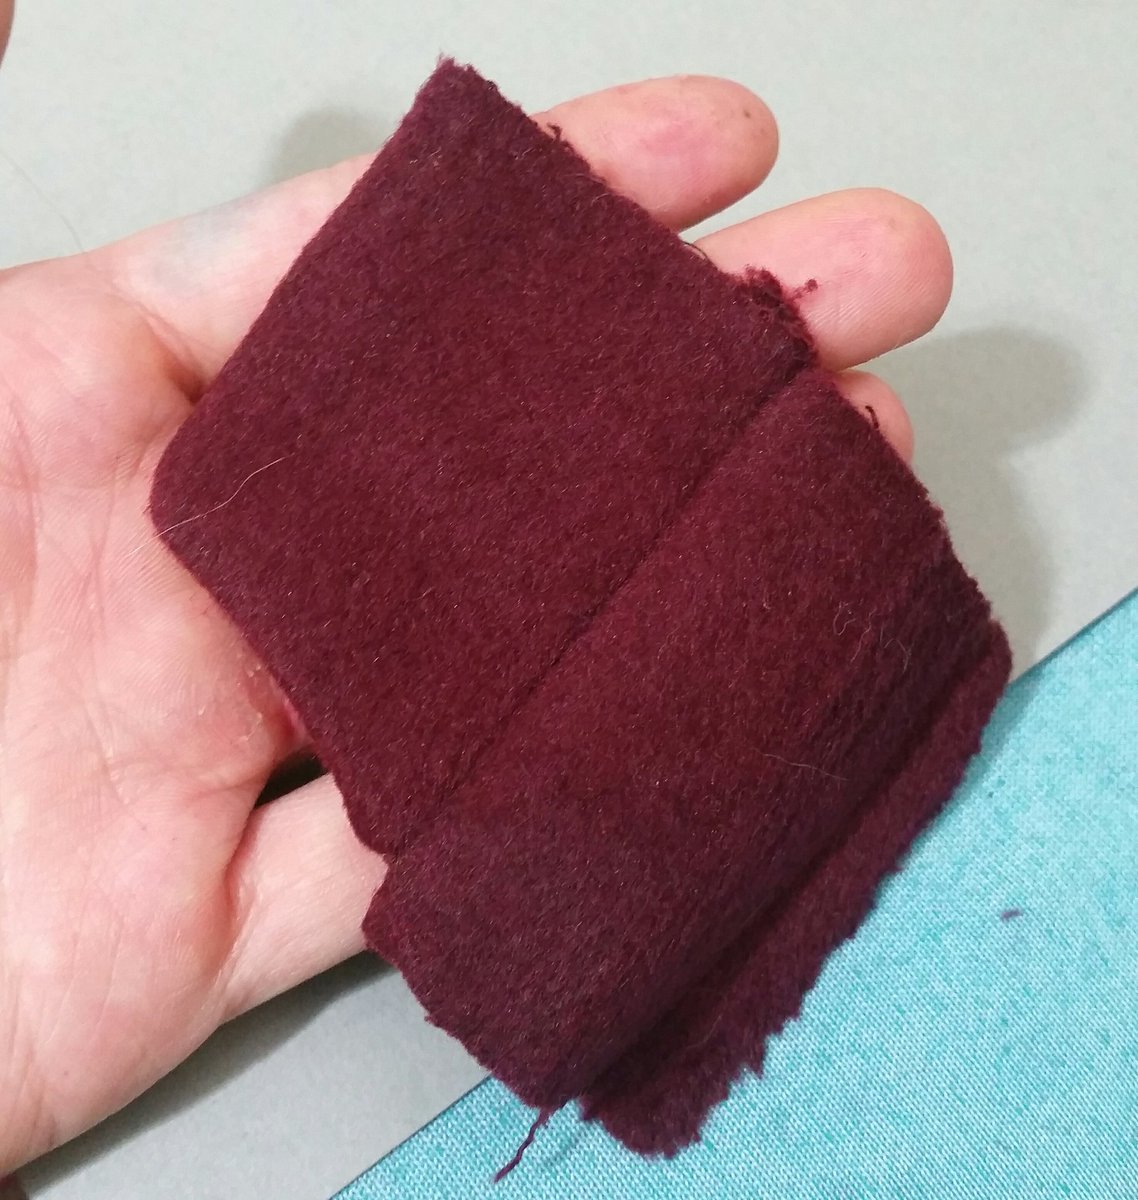 So Mile's wool arrived, and it's thicker than I anticipated--almost a flannel. I was concerned but it sews and presses really nicely. I think it'll look beautiful but boy it's going to be WARM